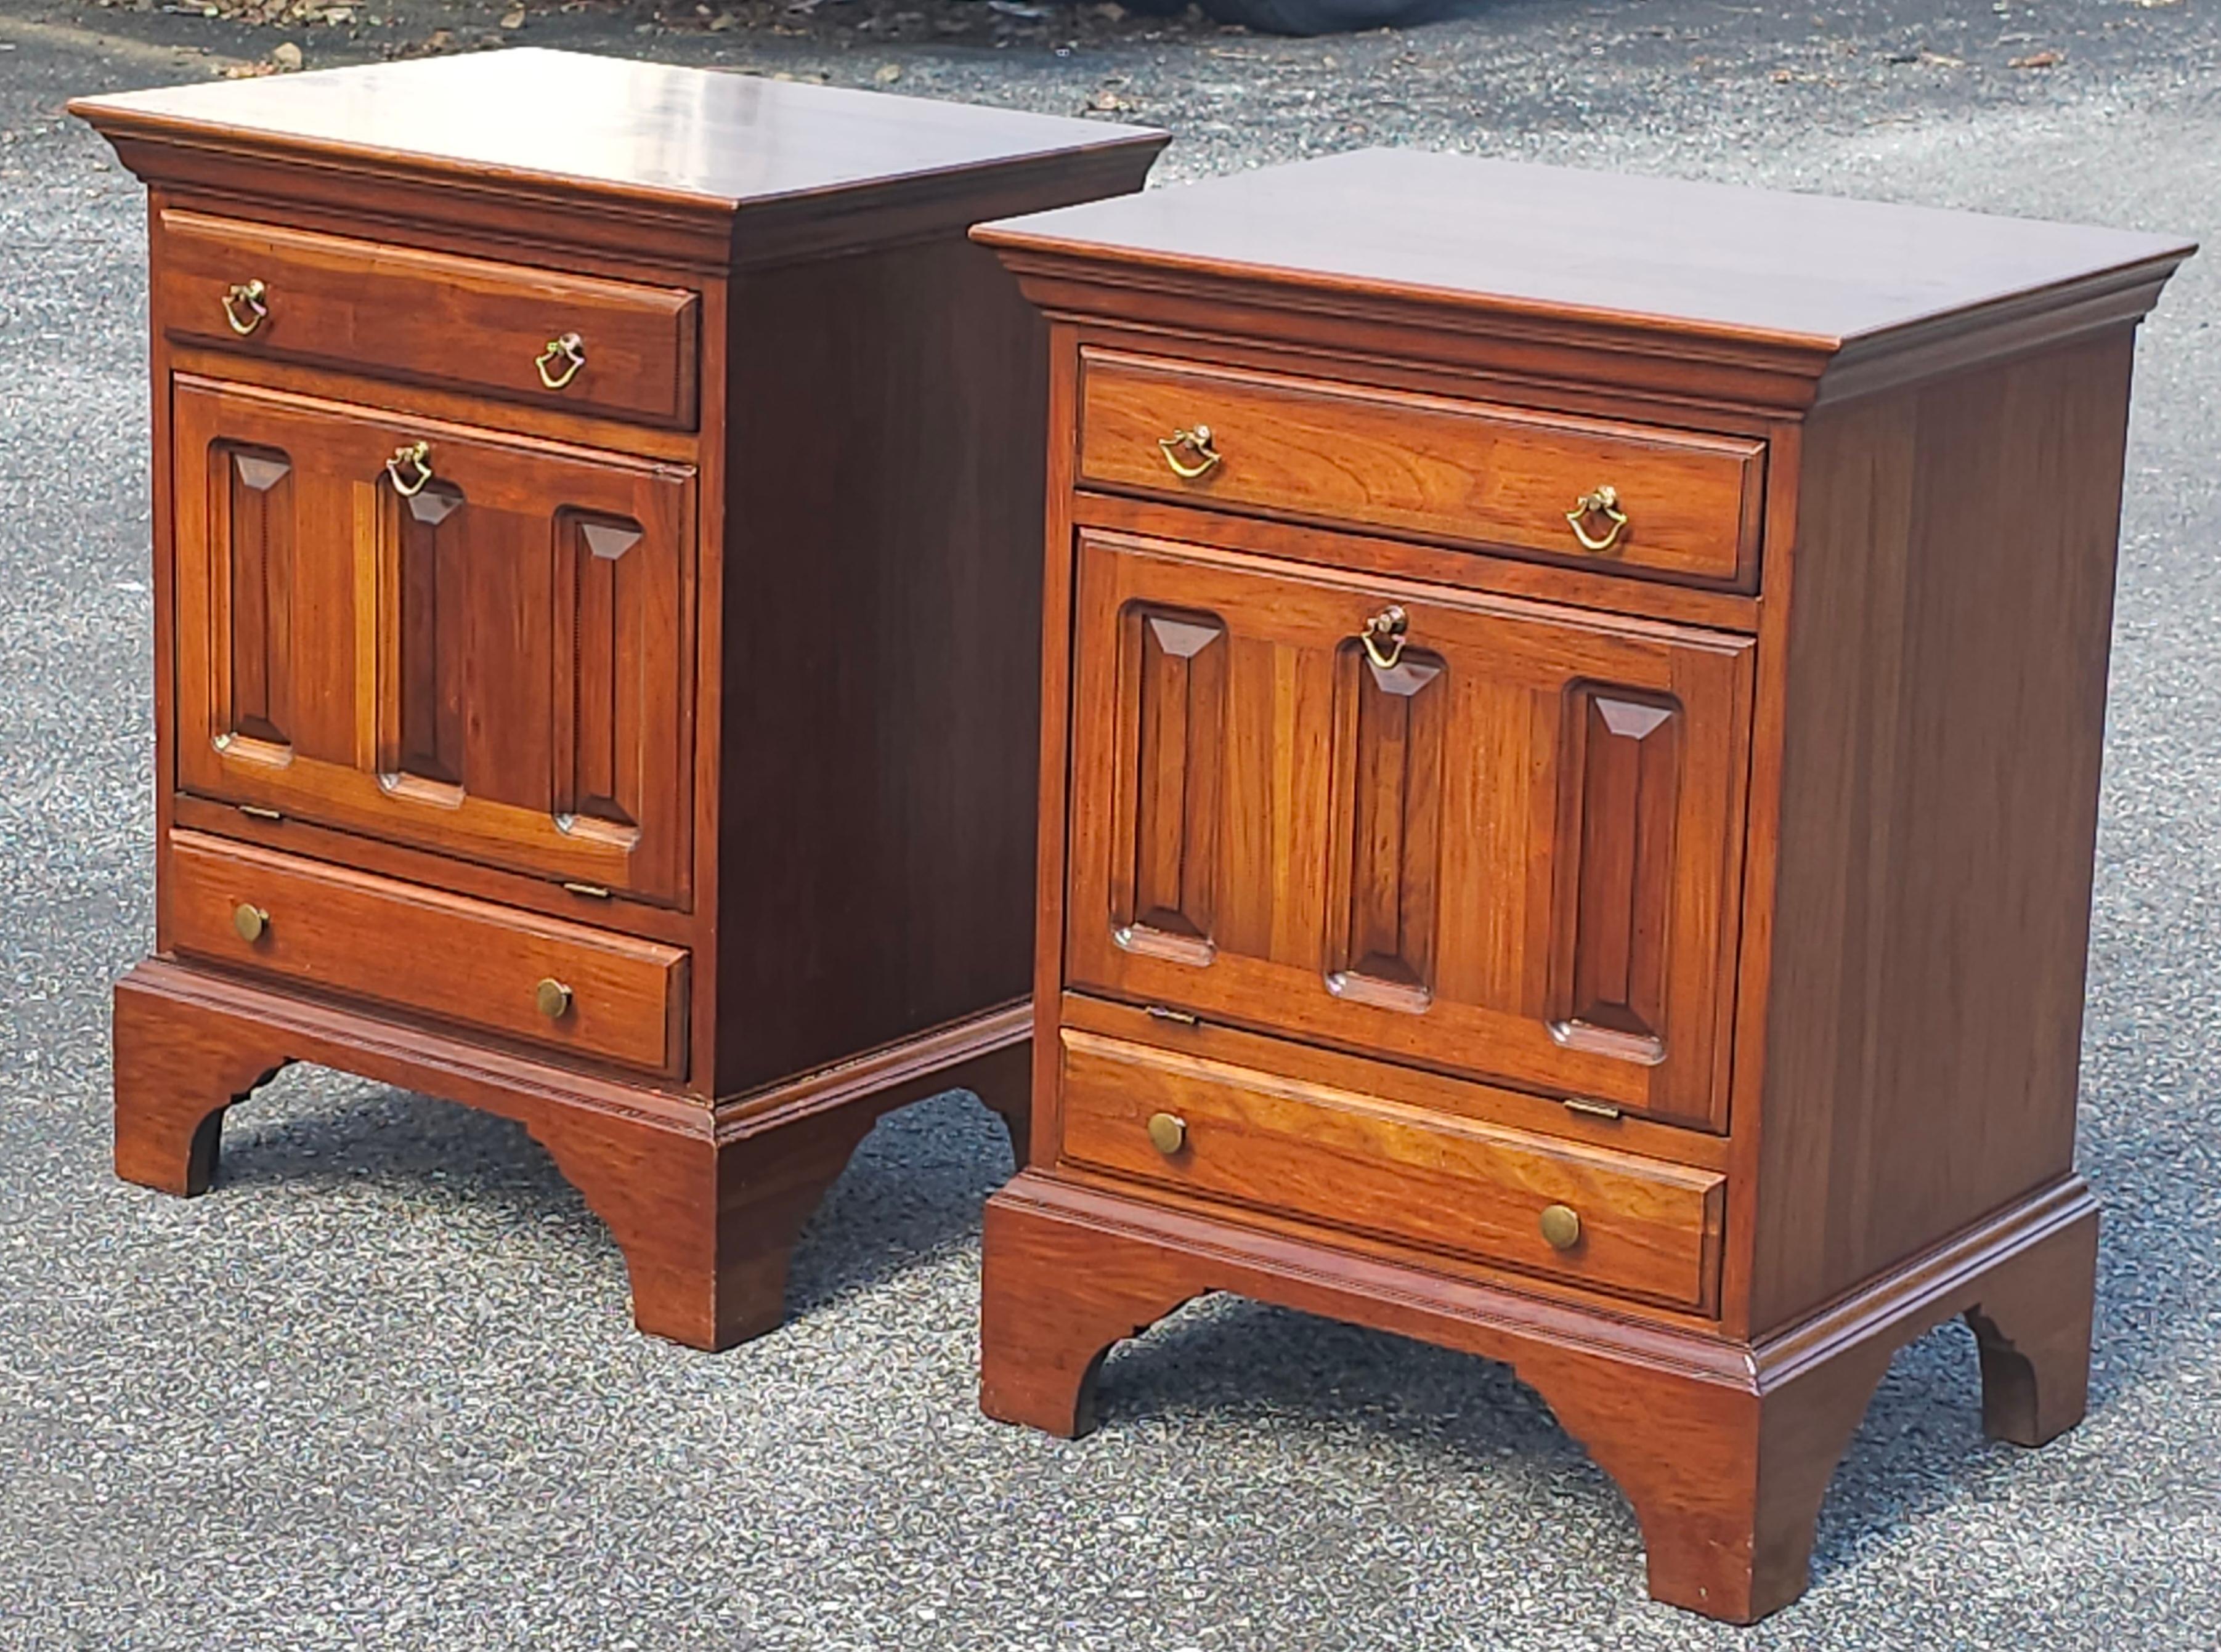 20th Century David Cabinet Cherry 2-Drawer a Abattant Door Bedside Cabinets Pair For Sale 11